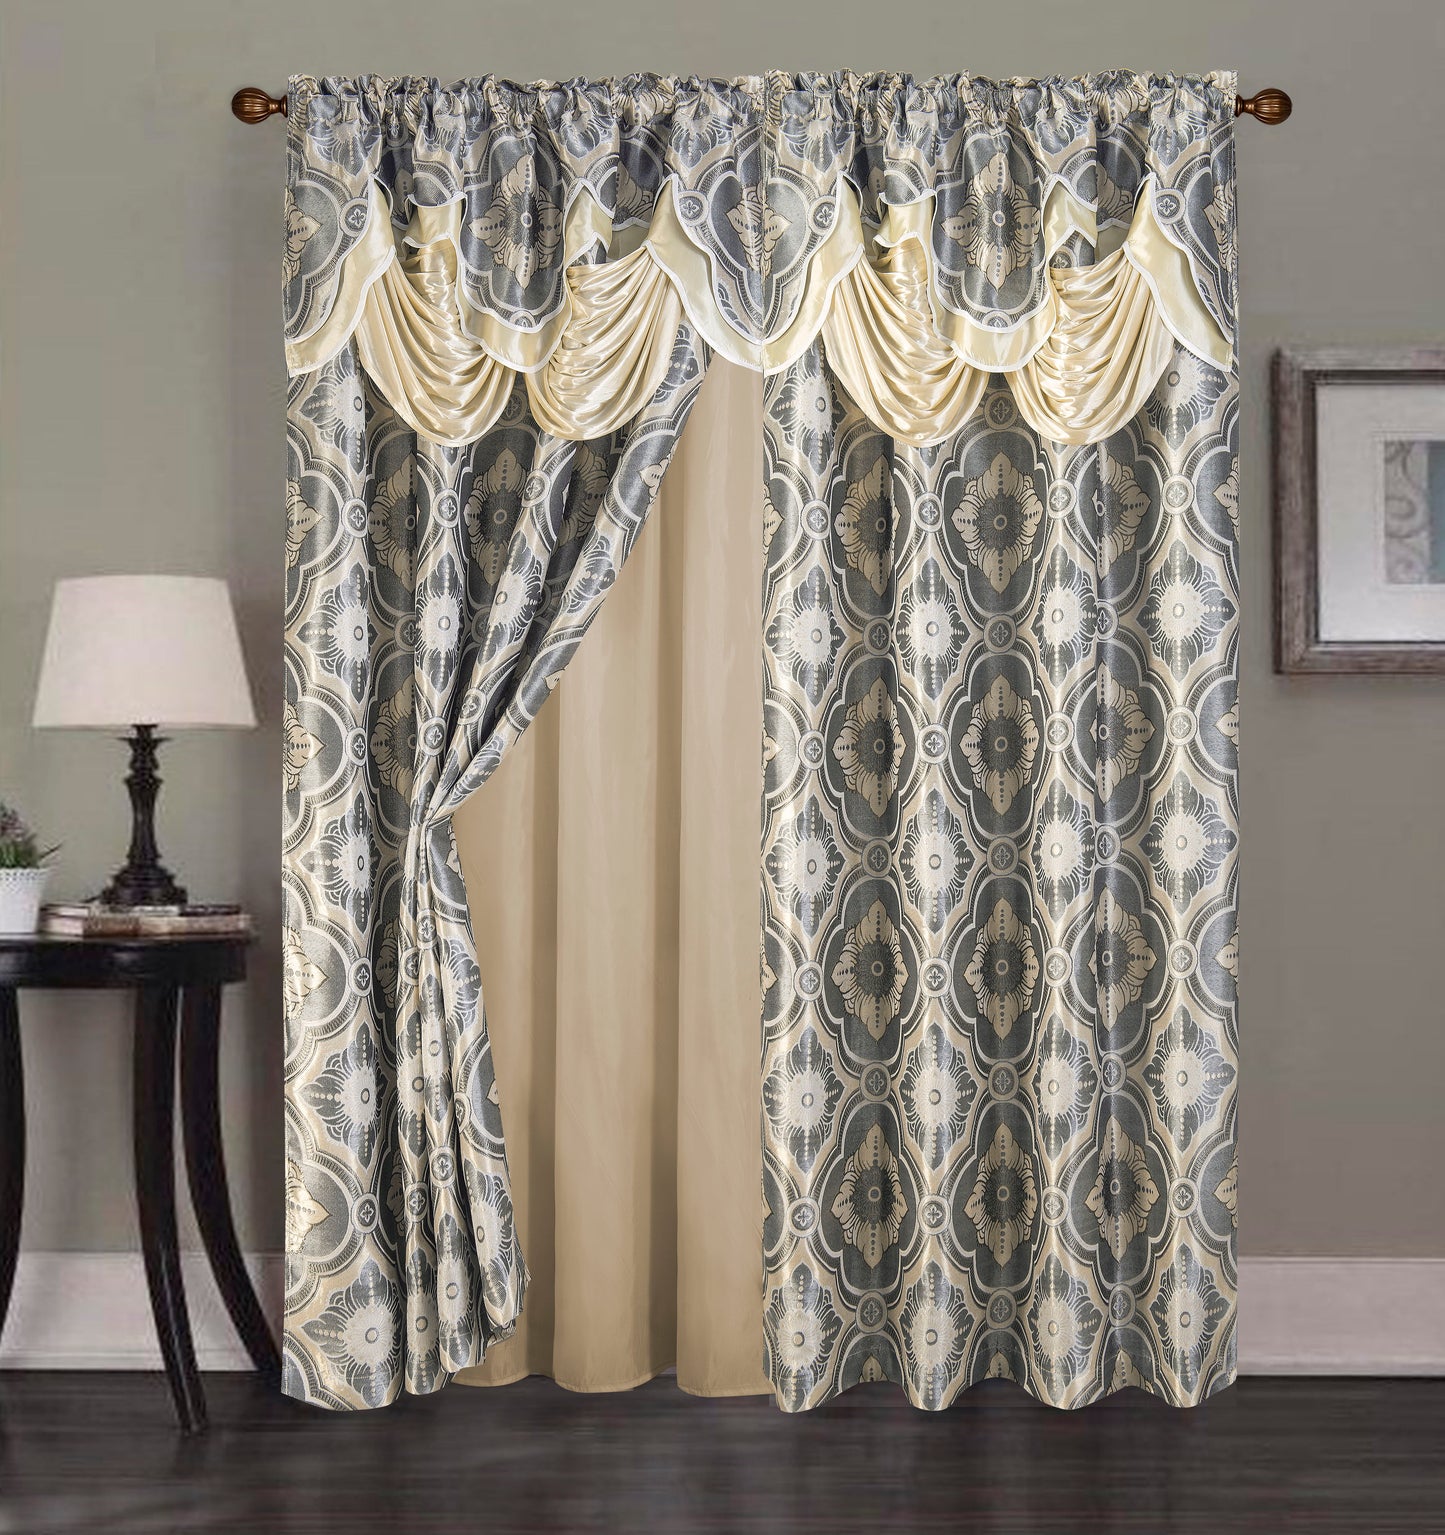 2PC CURTAIN SET W/ ATTACHED VALANCE & BACKING - Hailey